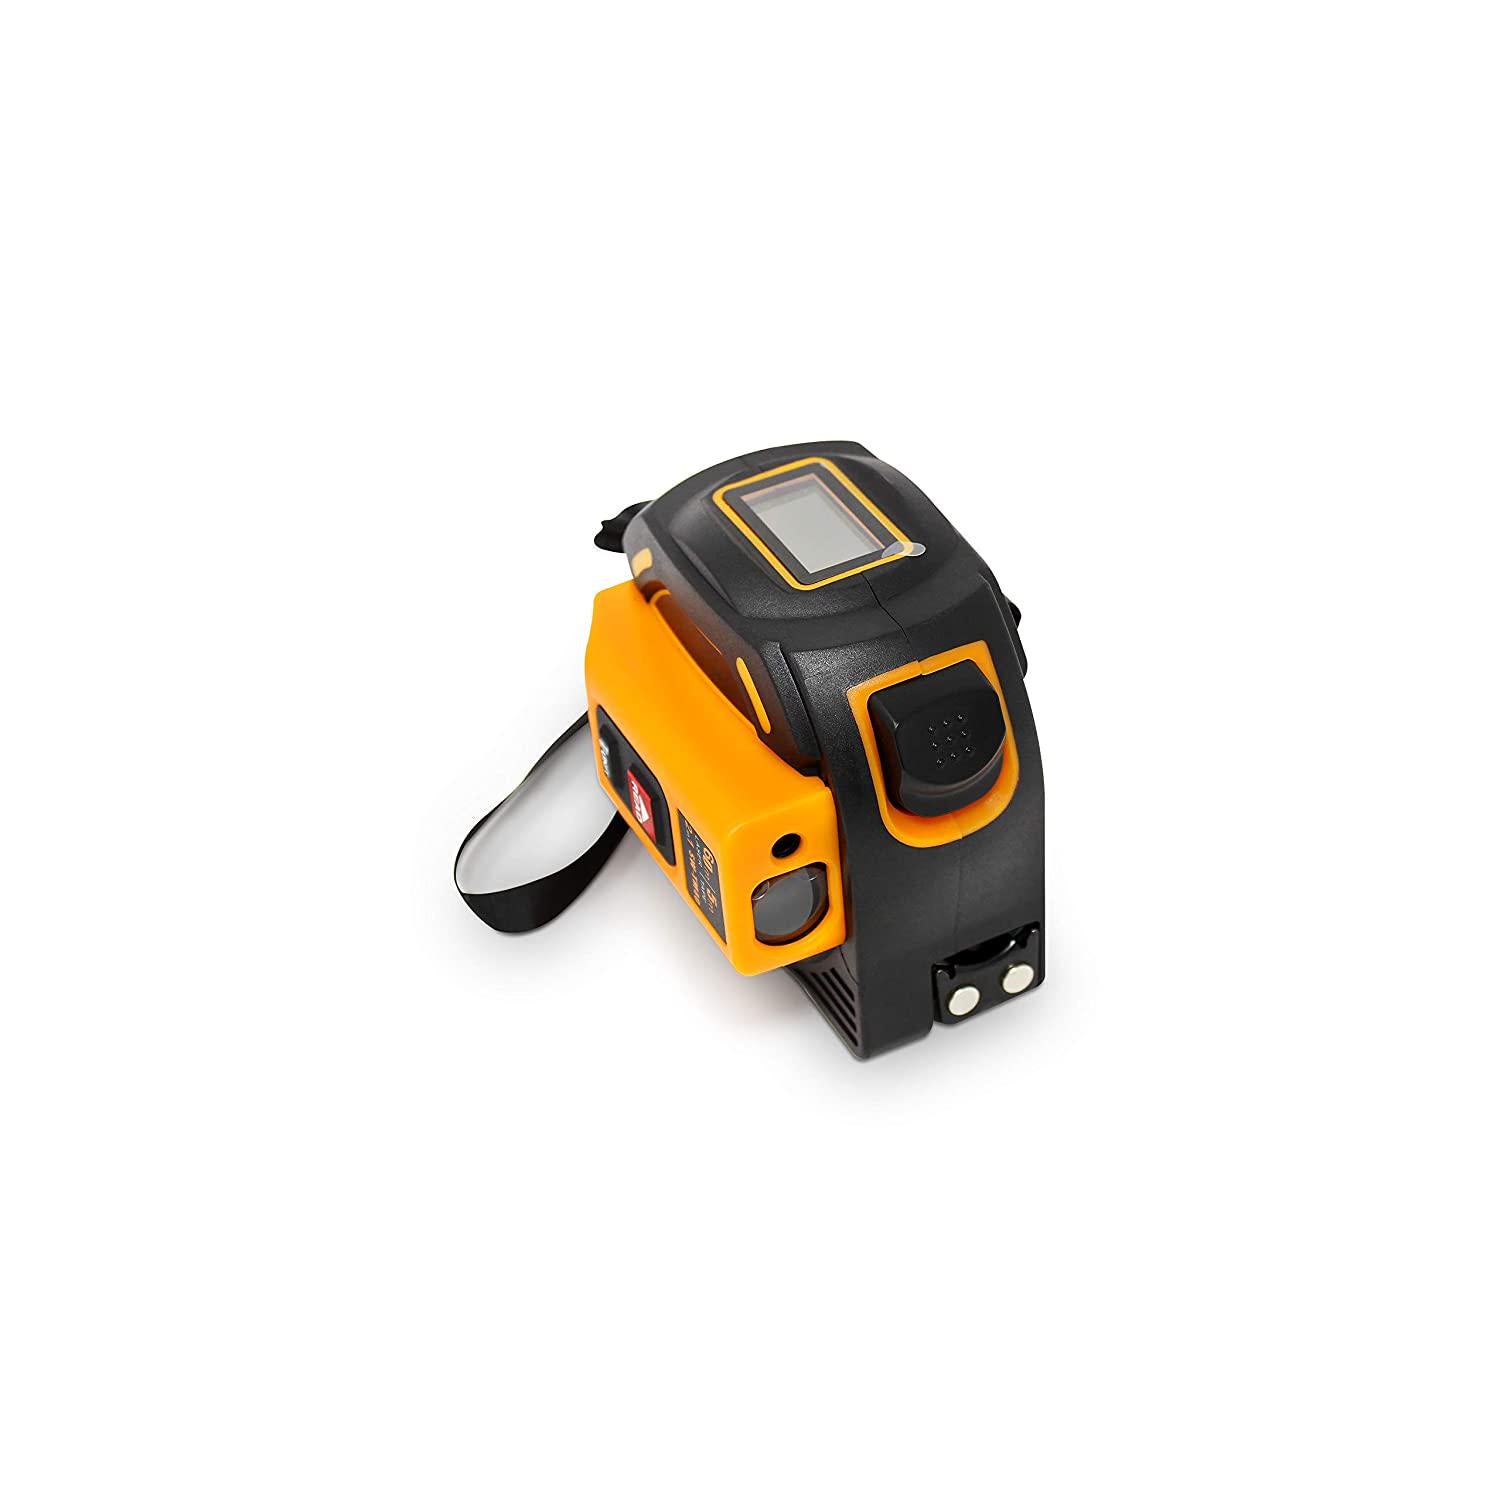 HISS, Laser Tape Measure 2-in-1, Laser Measure 196 Ft, Tape Measure 16 Ft Metric and US units with LCD Digital Display, Movable Magnetic Hook, Unit Conversion, Sturdy Build, Consistent and Accurate